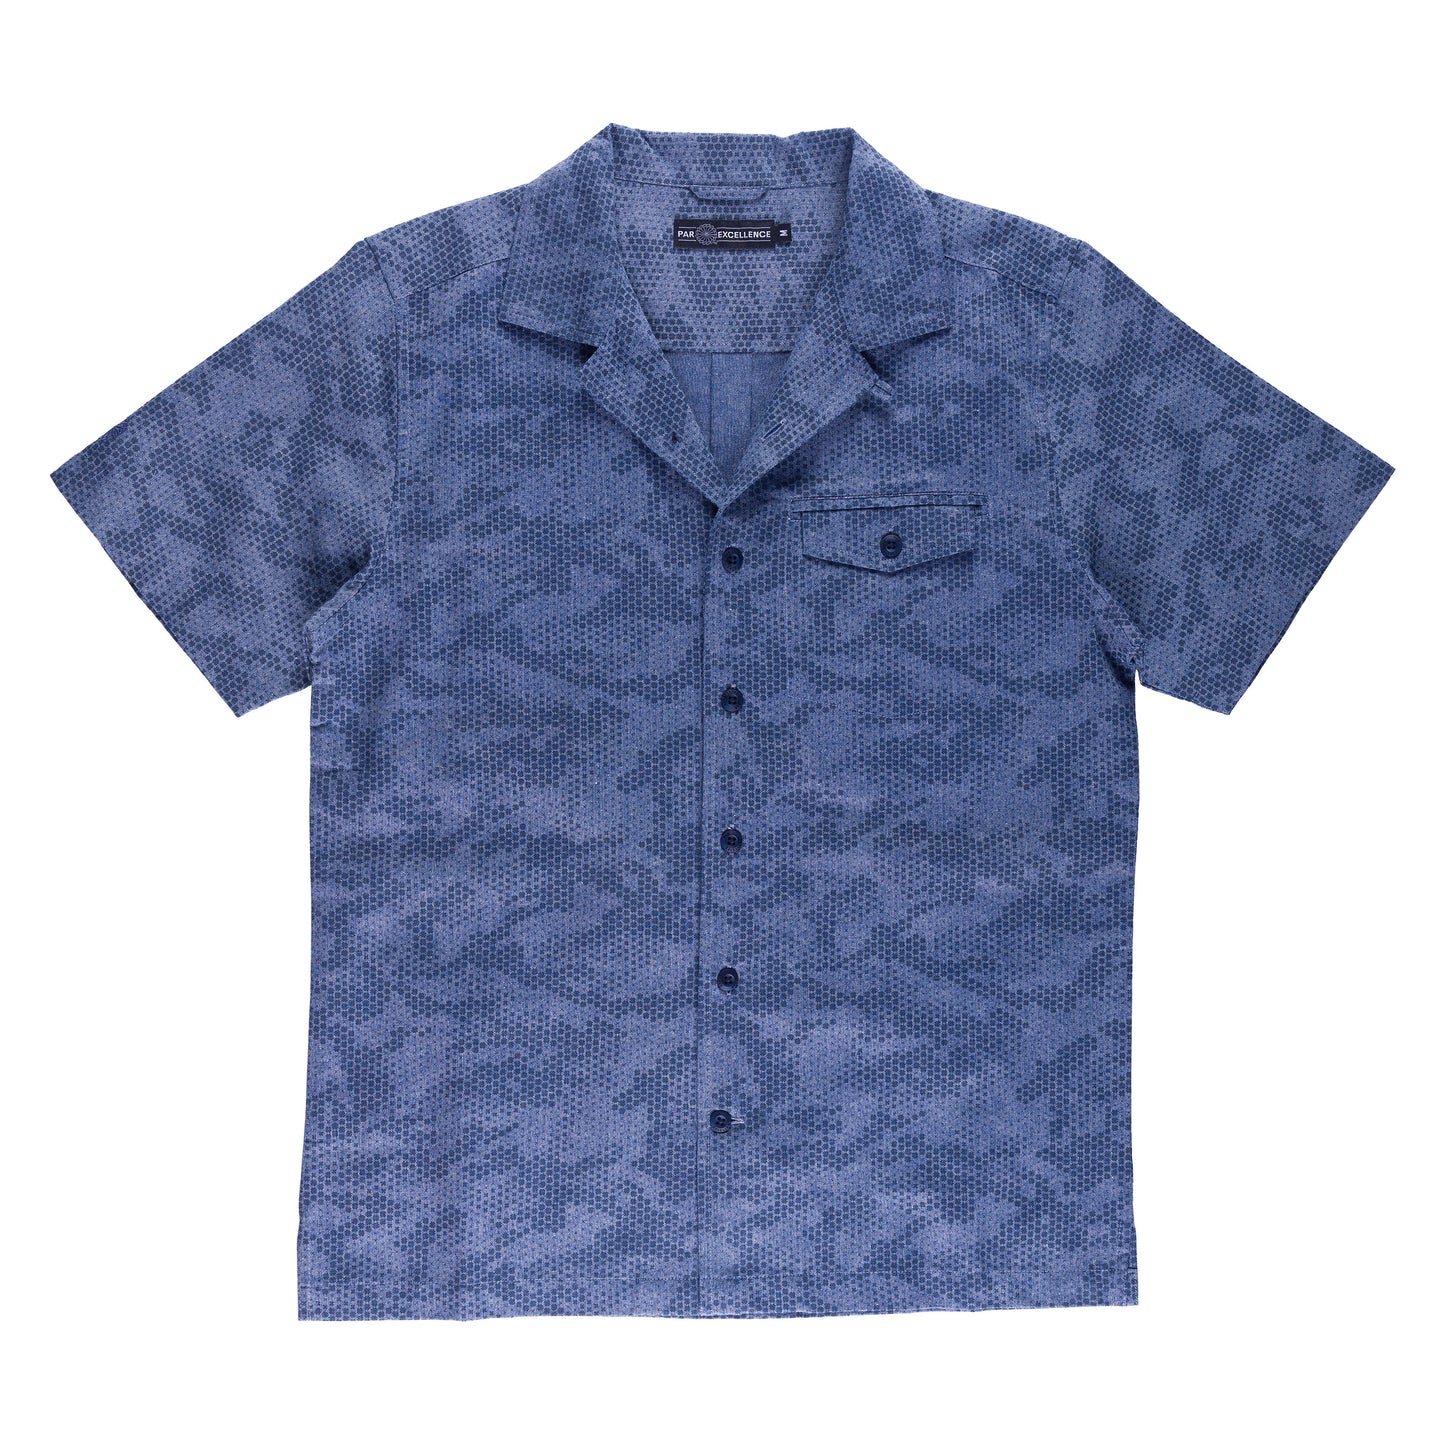 The Squire in X Camo Chambray